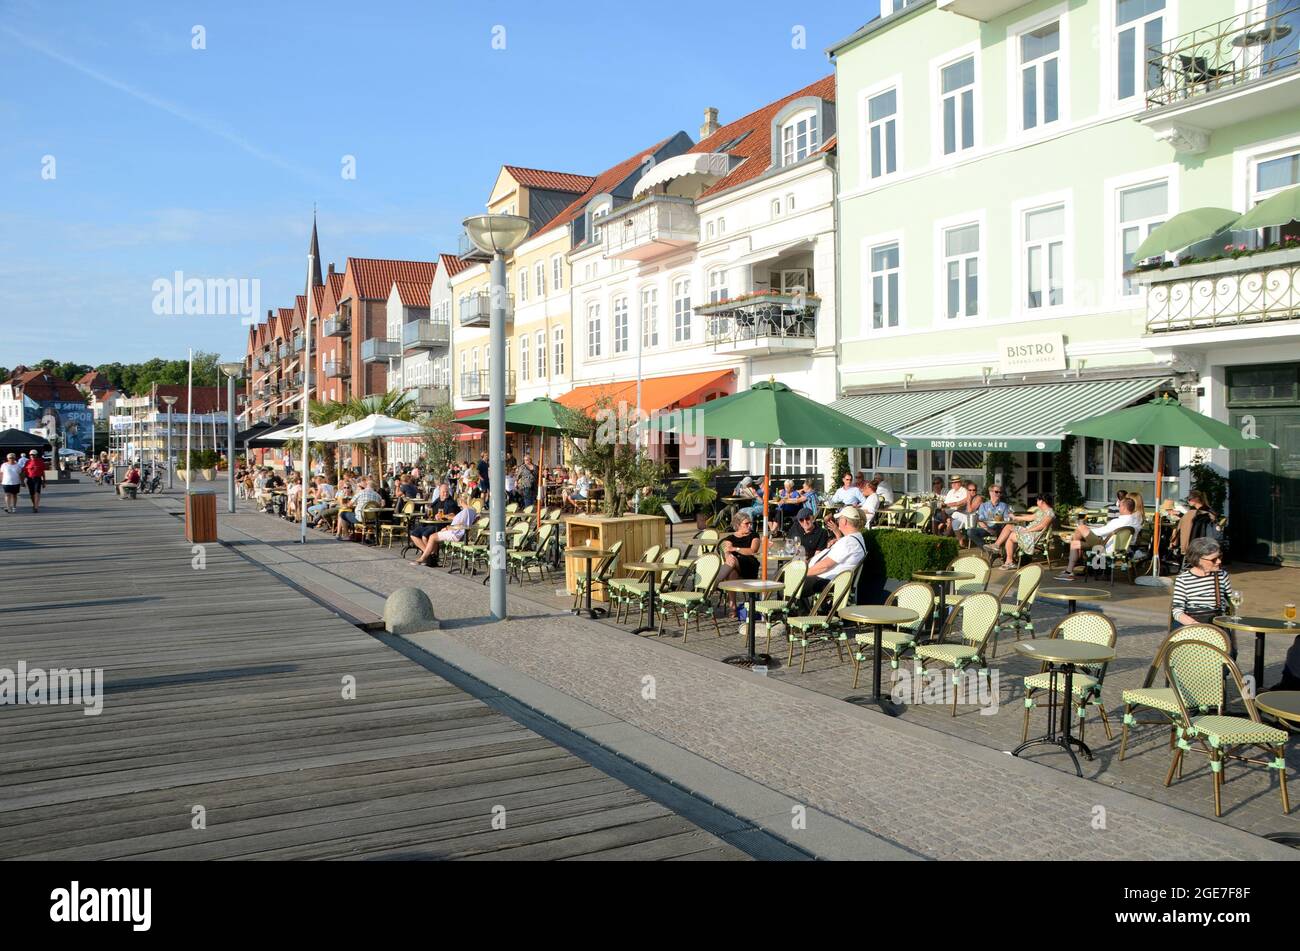 S�nderborg, Denmark - August 12, 2021: Outdoors caf�  life along S�ndre Havnegade at the harbour. Stock Photo